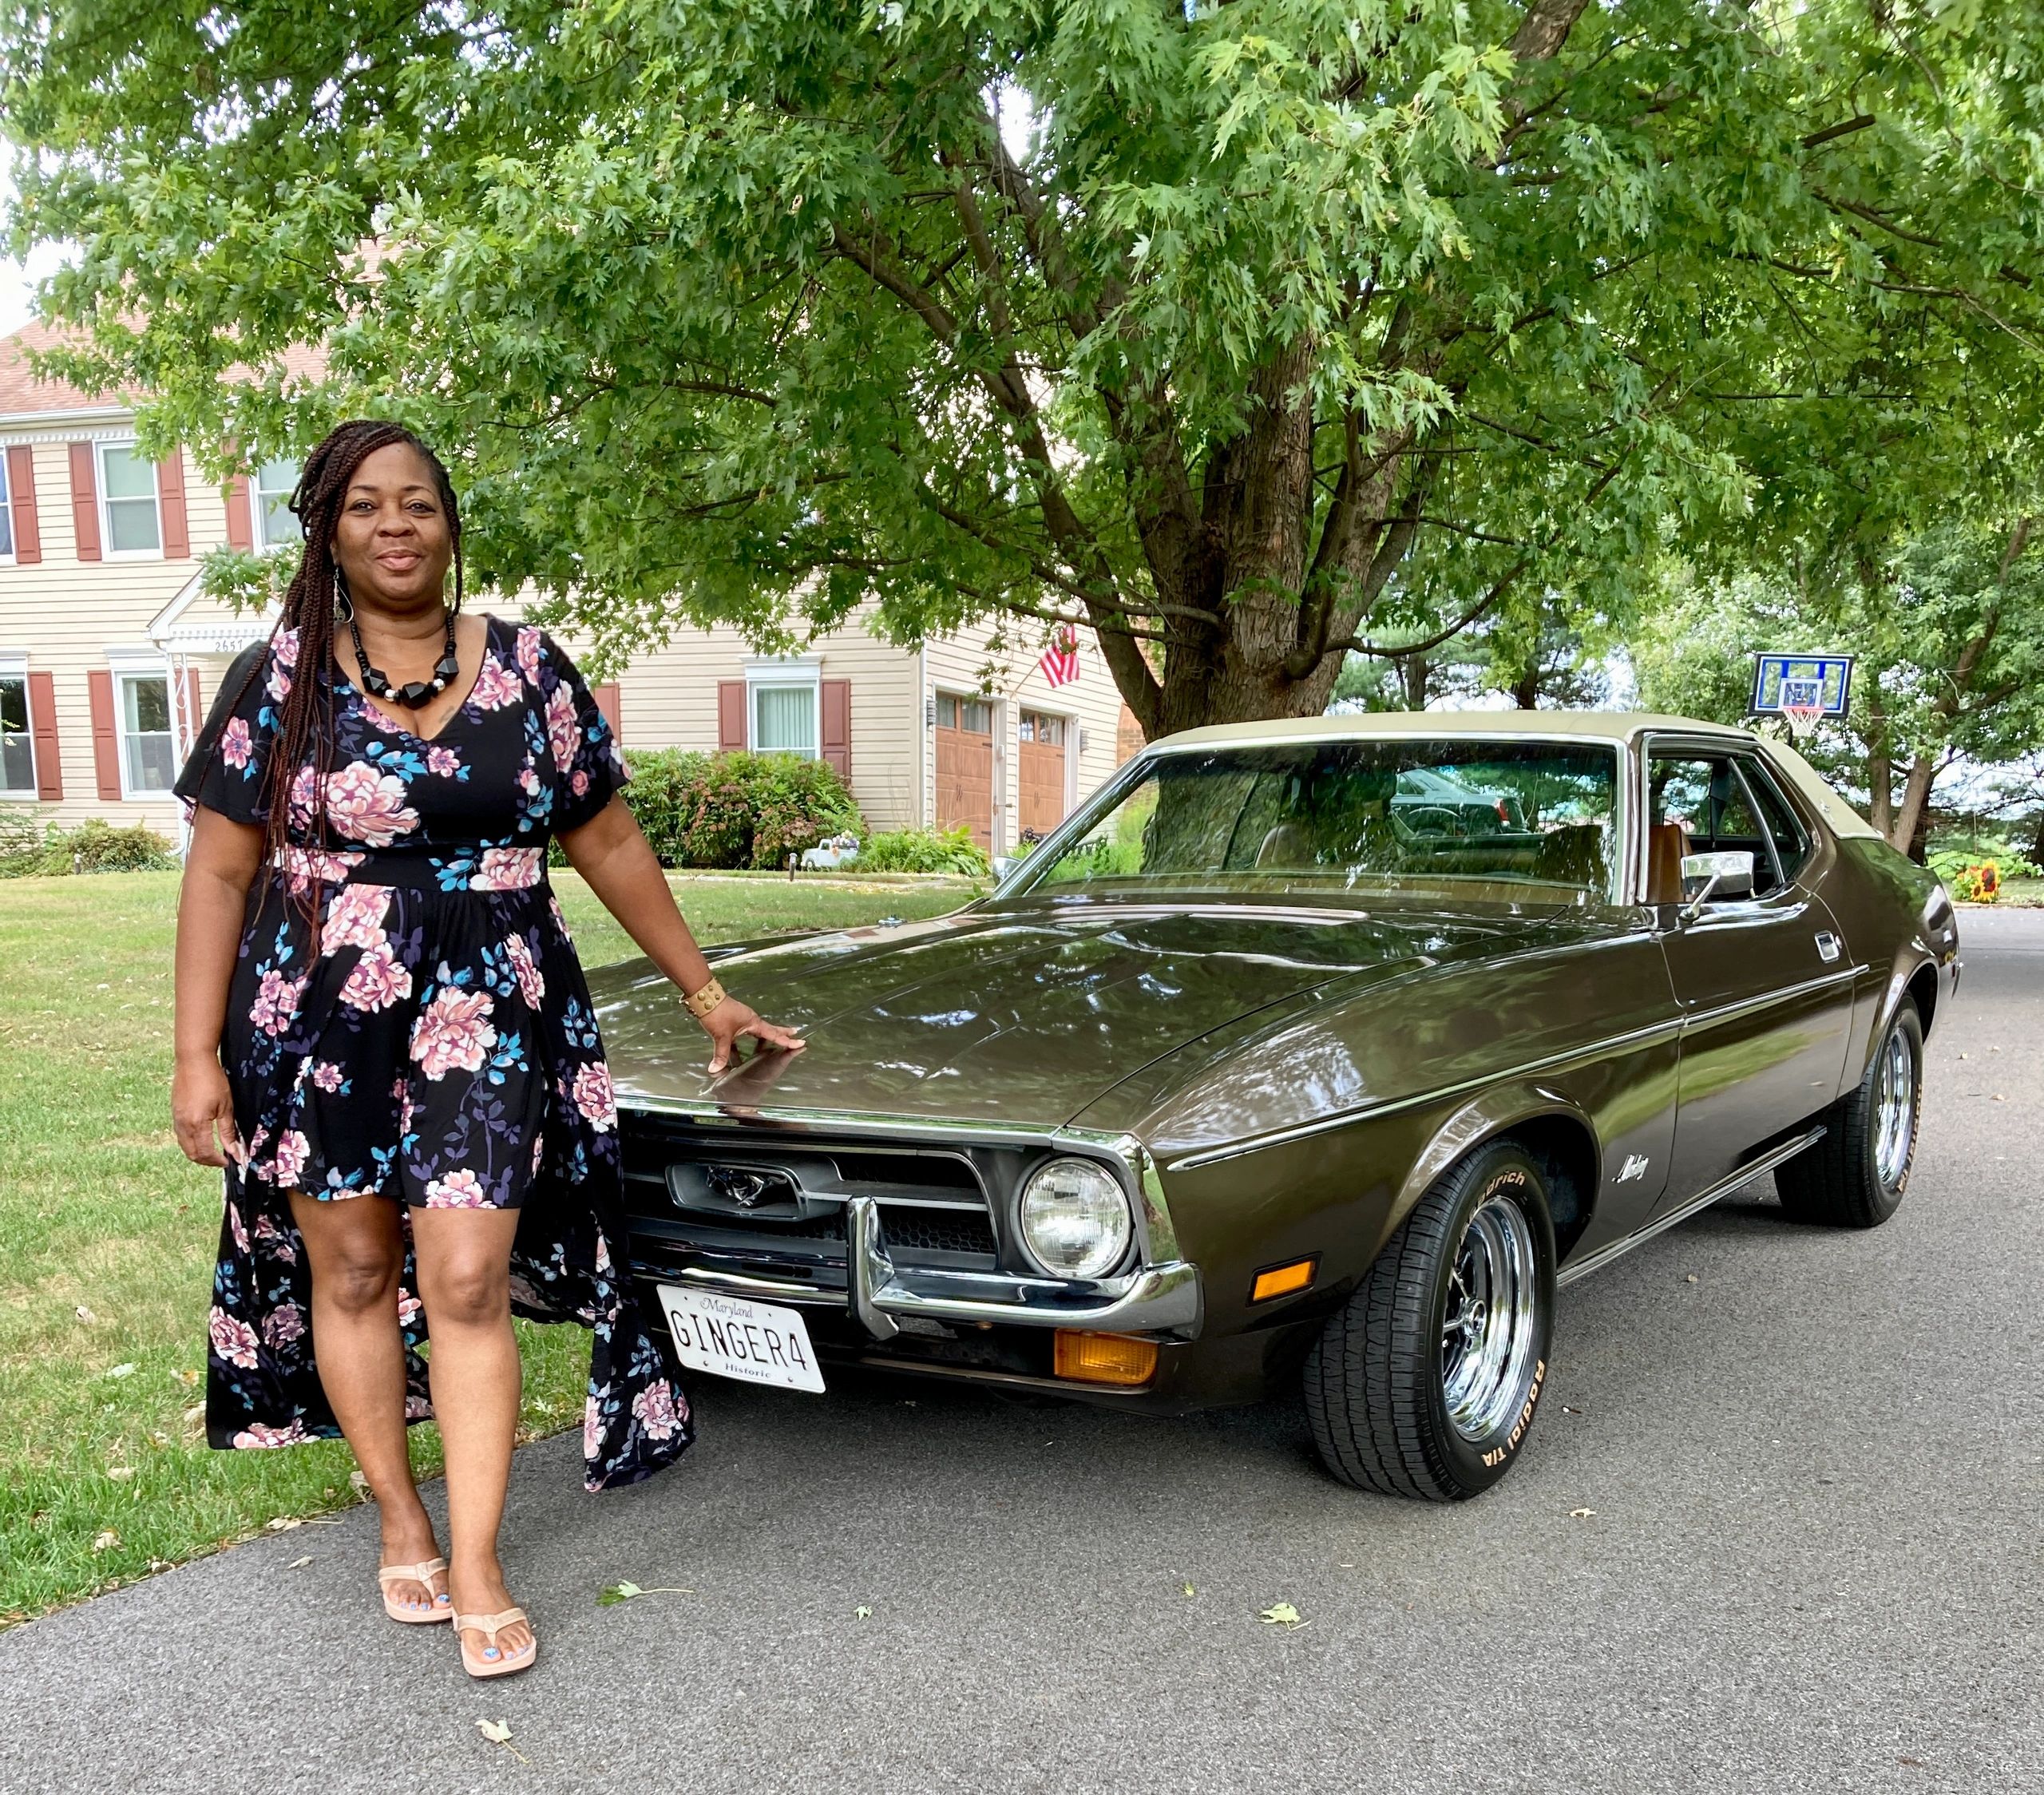 Treena with her 1965 Mustang